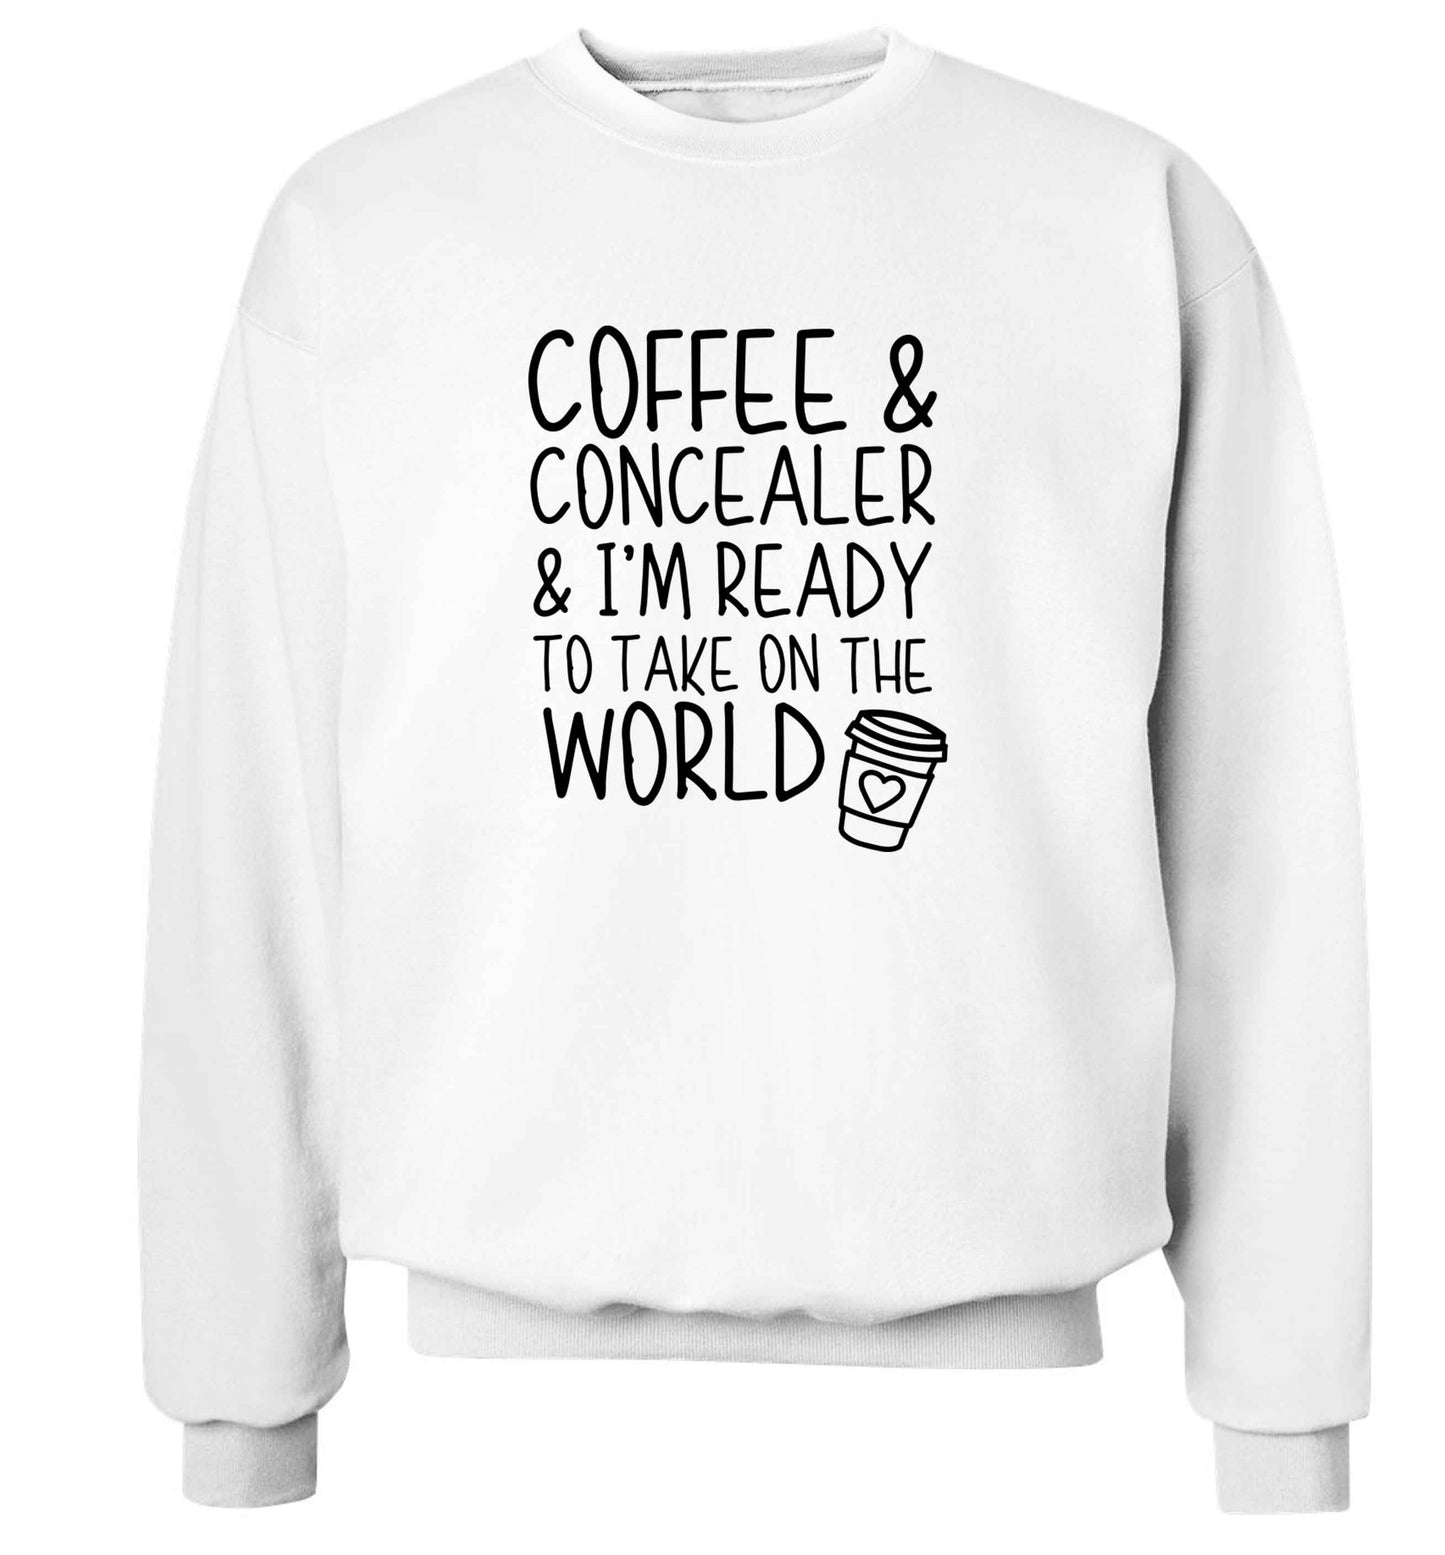 Coffee and concealer and I'm ready to take on the world adult's unisex white sweater 2XL